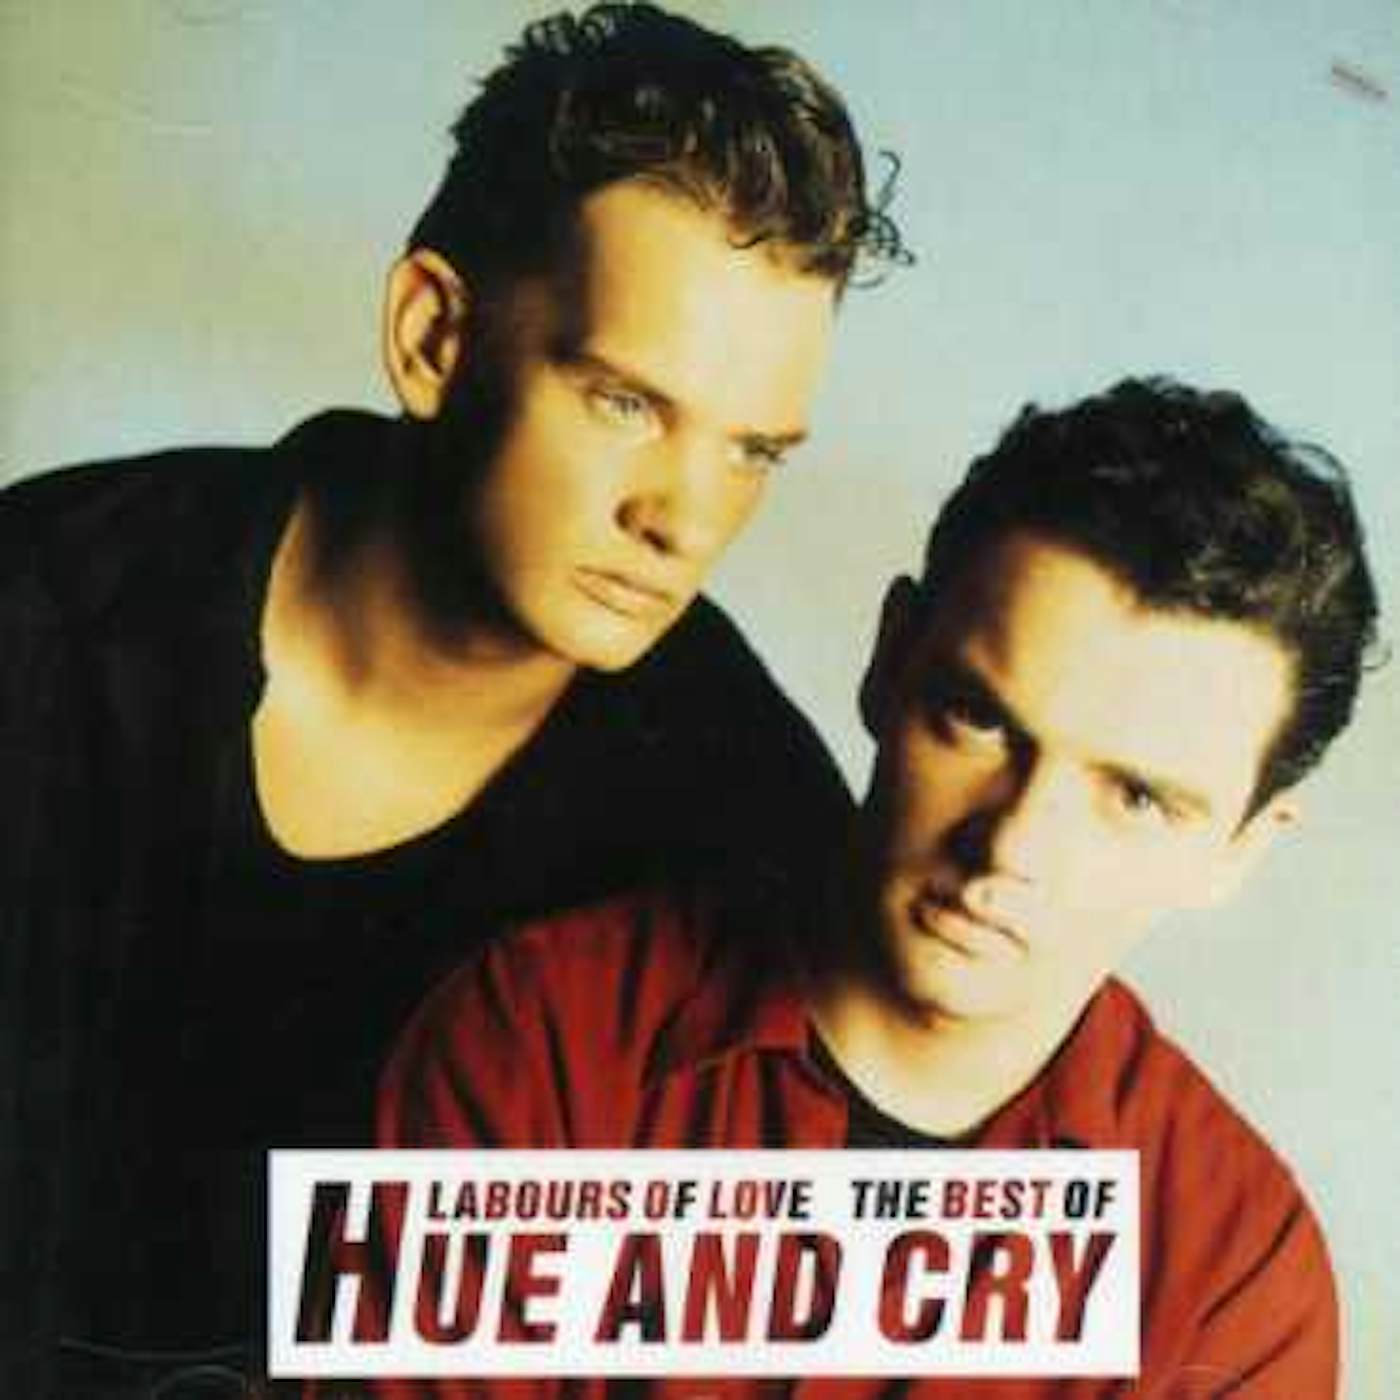 Hue and Cry LABOURS OF LOVE: BEST OF CD